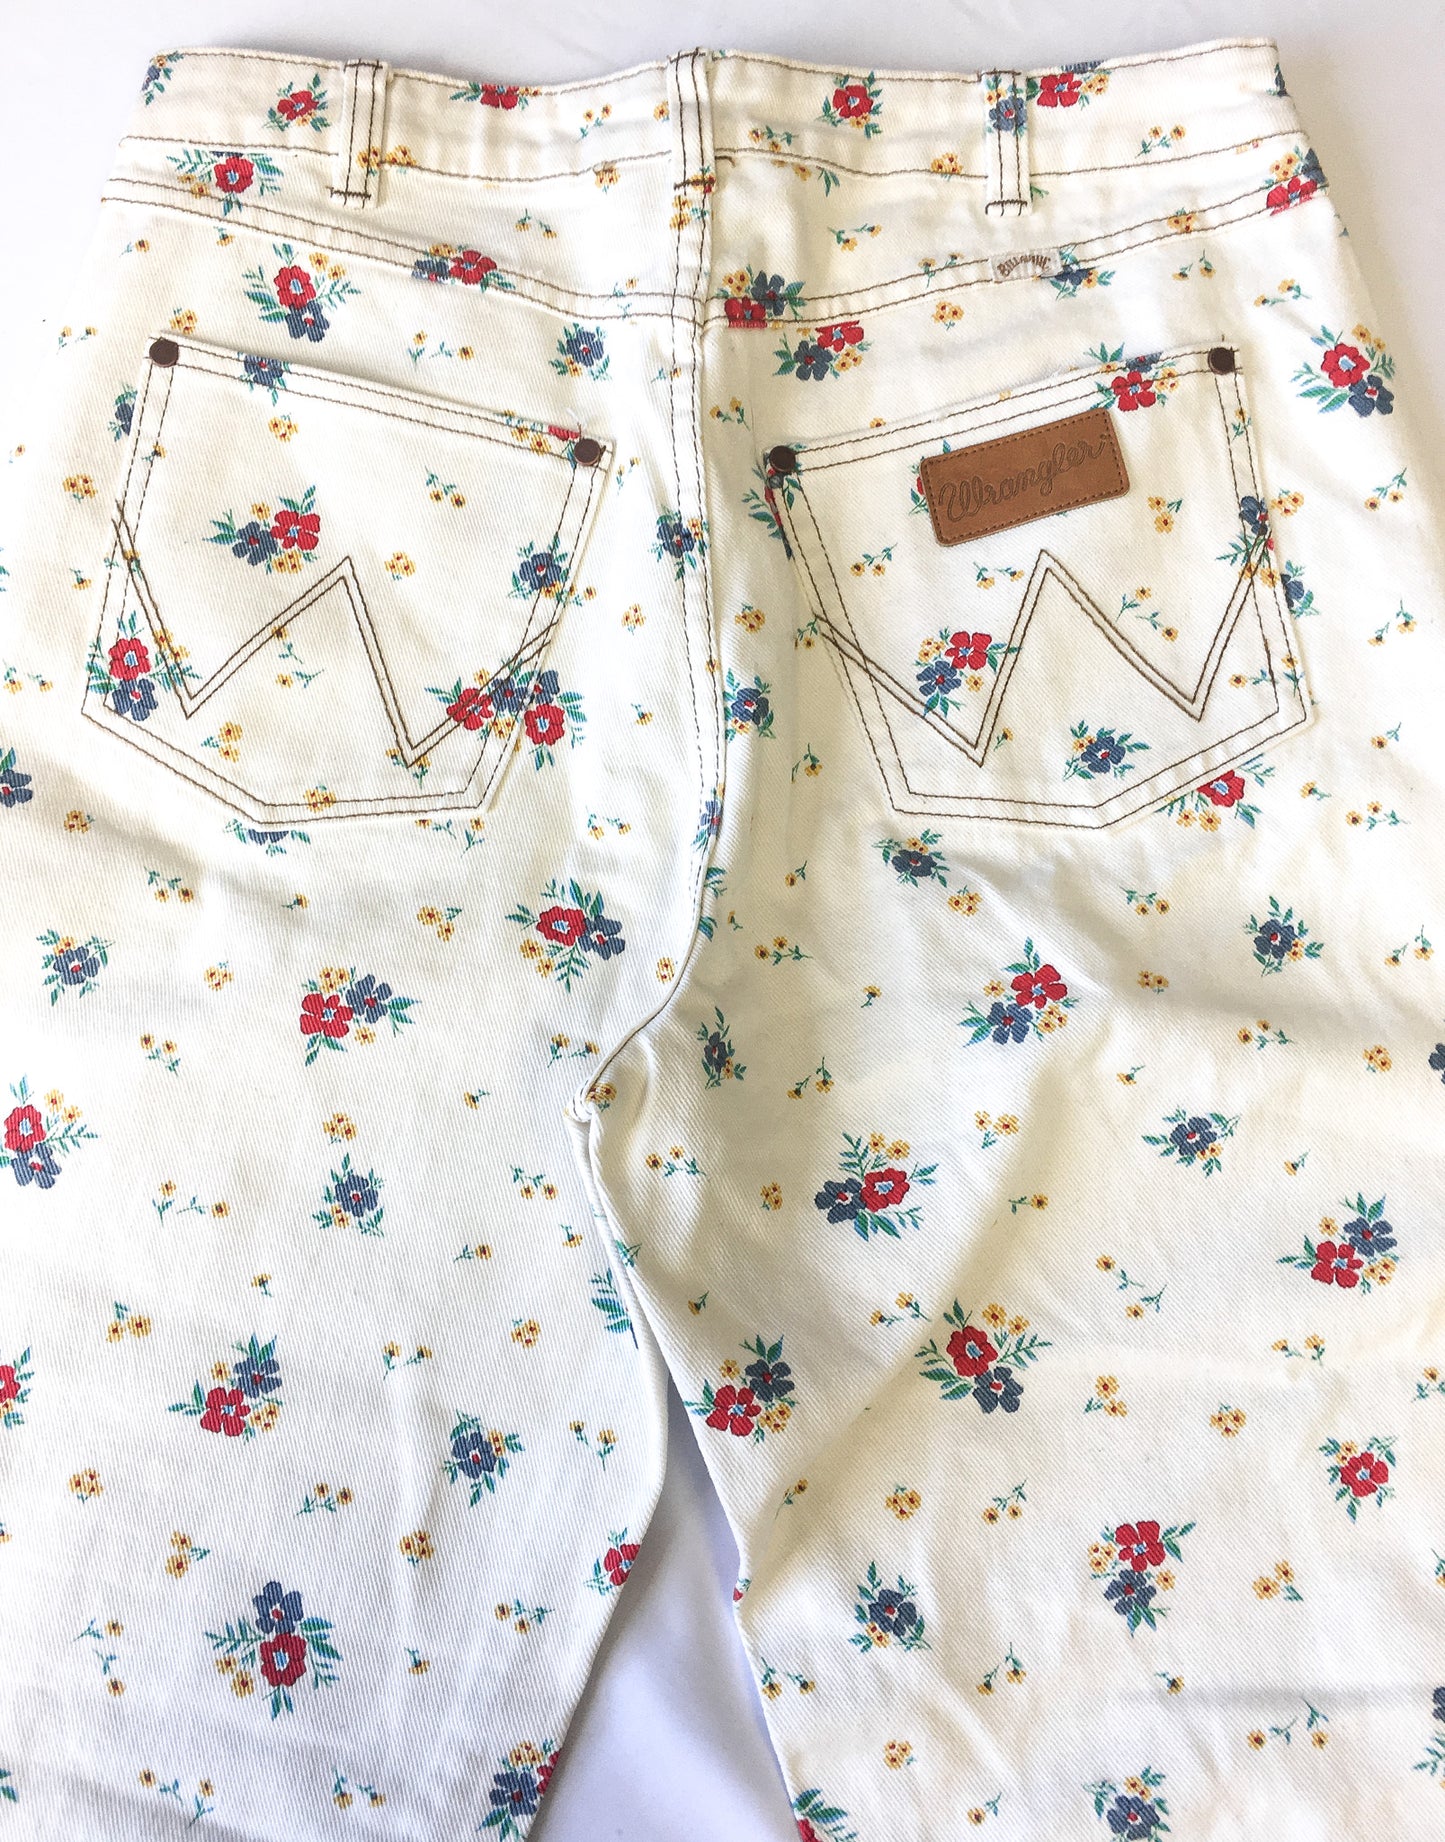 Wrangler x Billabong She's Cheeky Cream/Off-White Floral Cropped Jeans, Women's Sz. 29